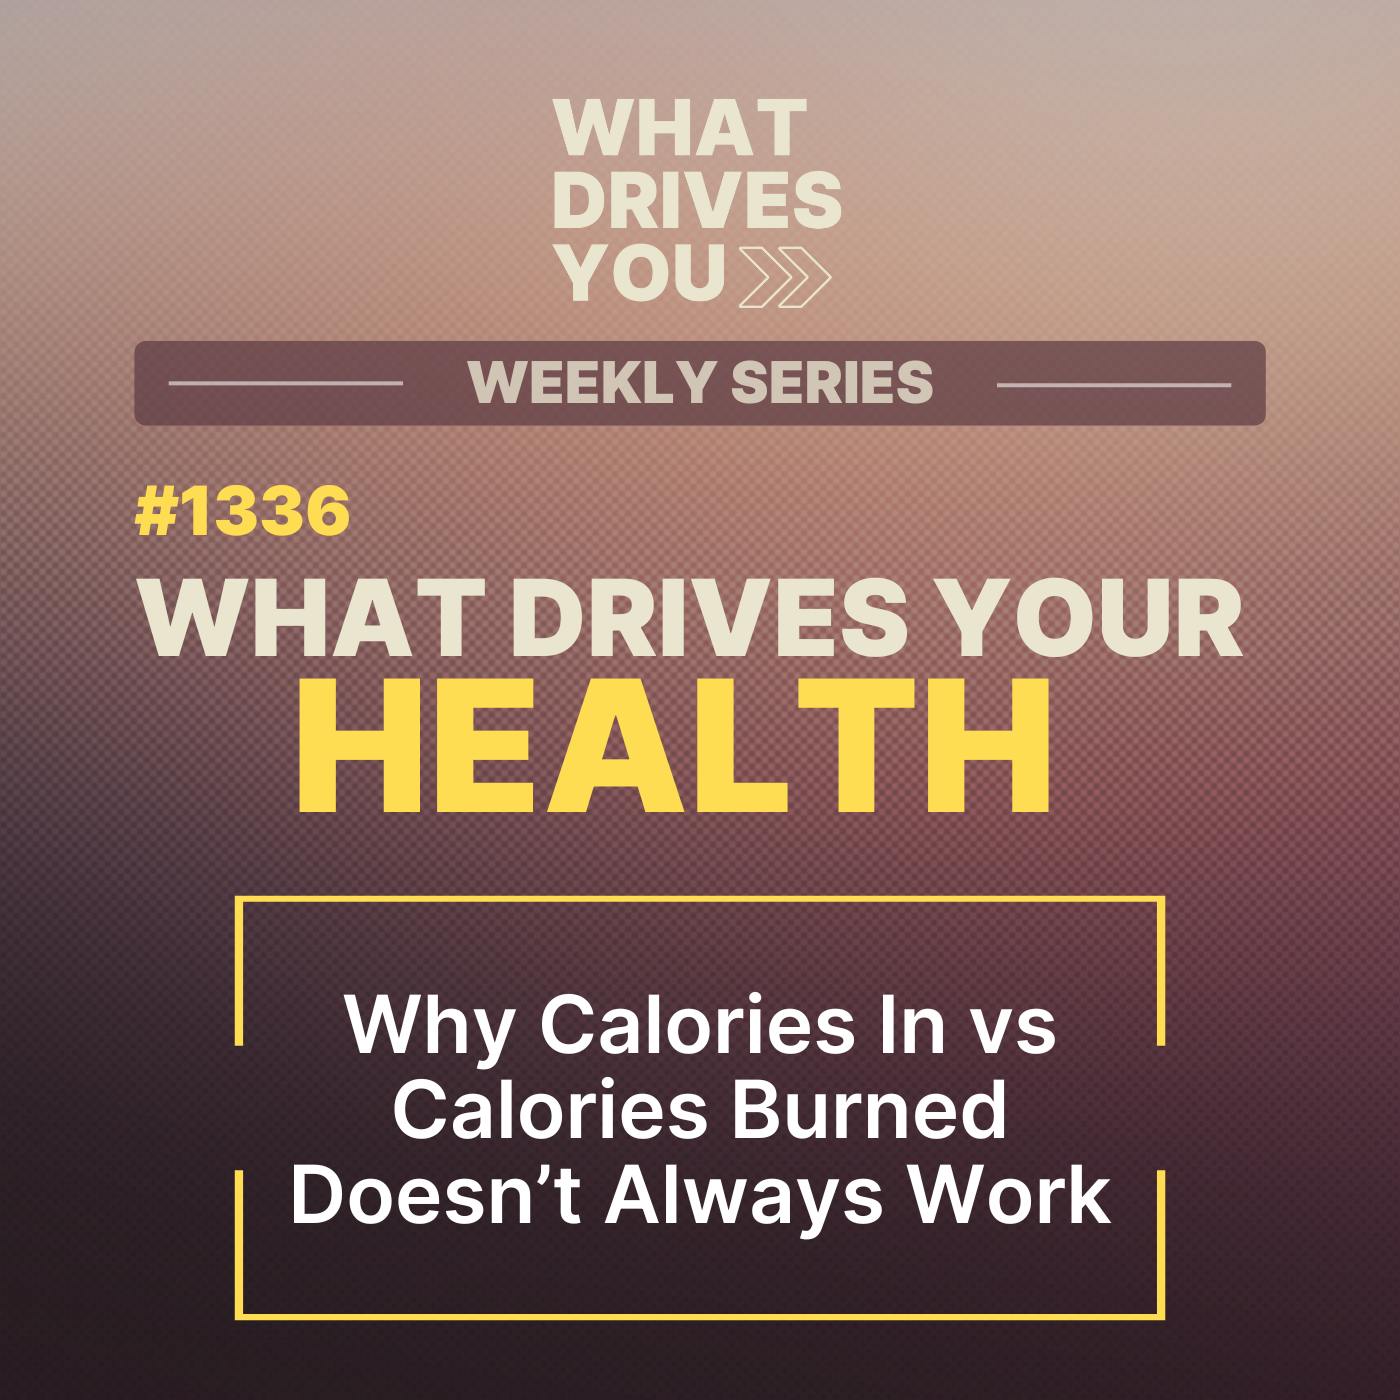 Why Calories In vs Calories Burned Doesn’t Always Work